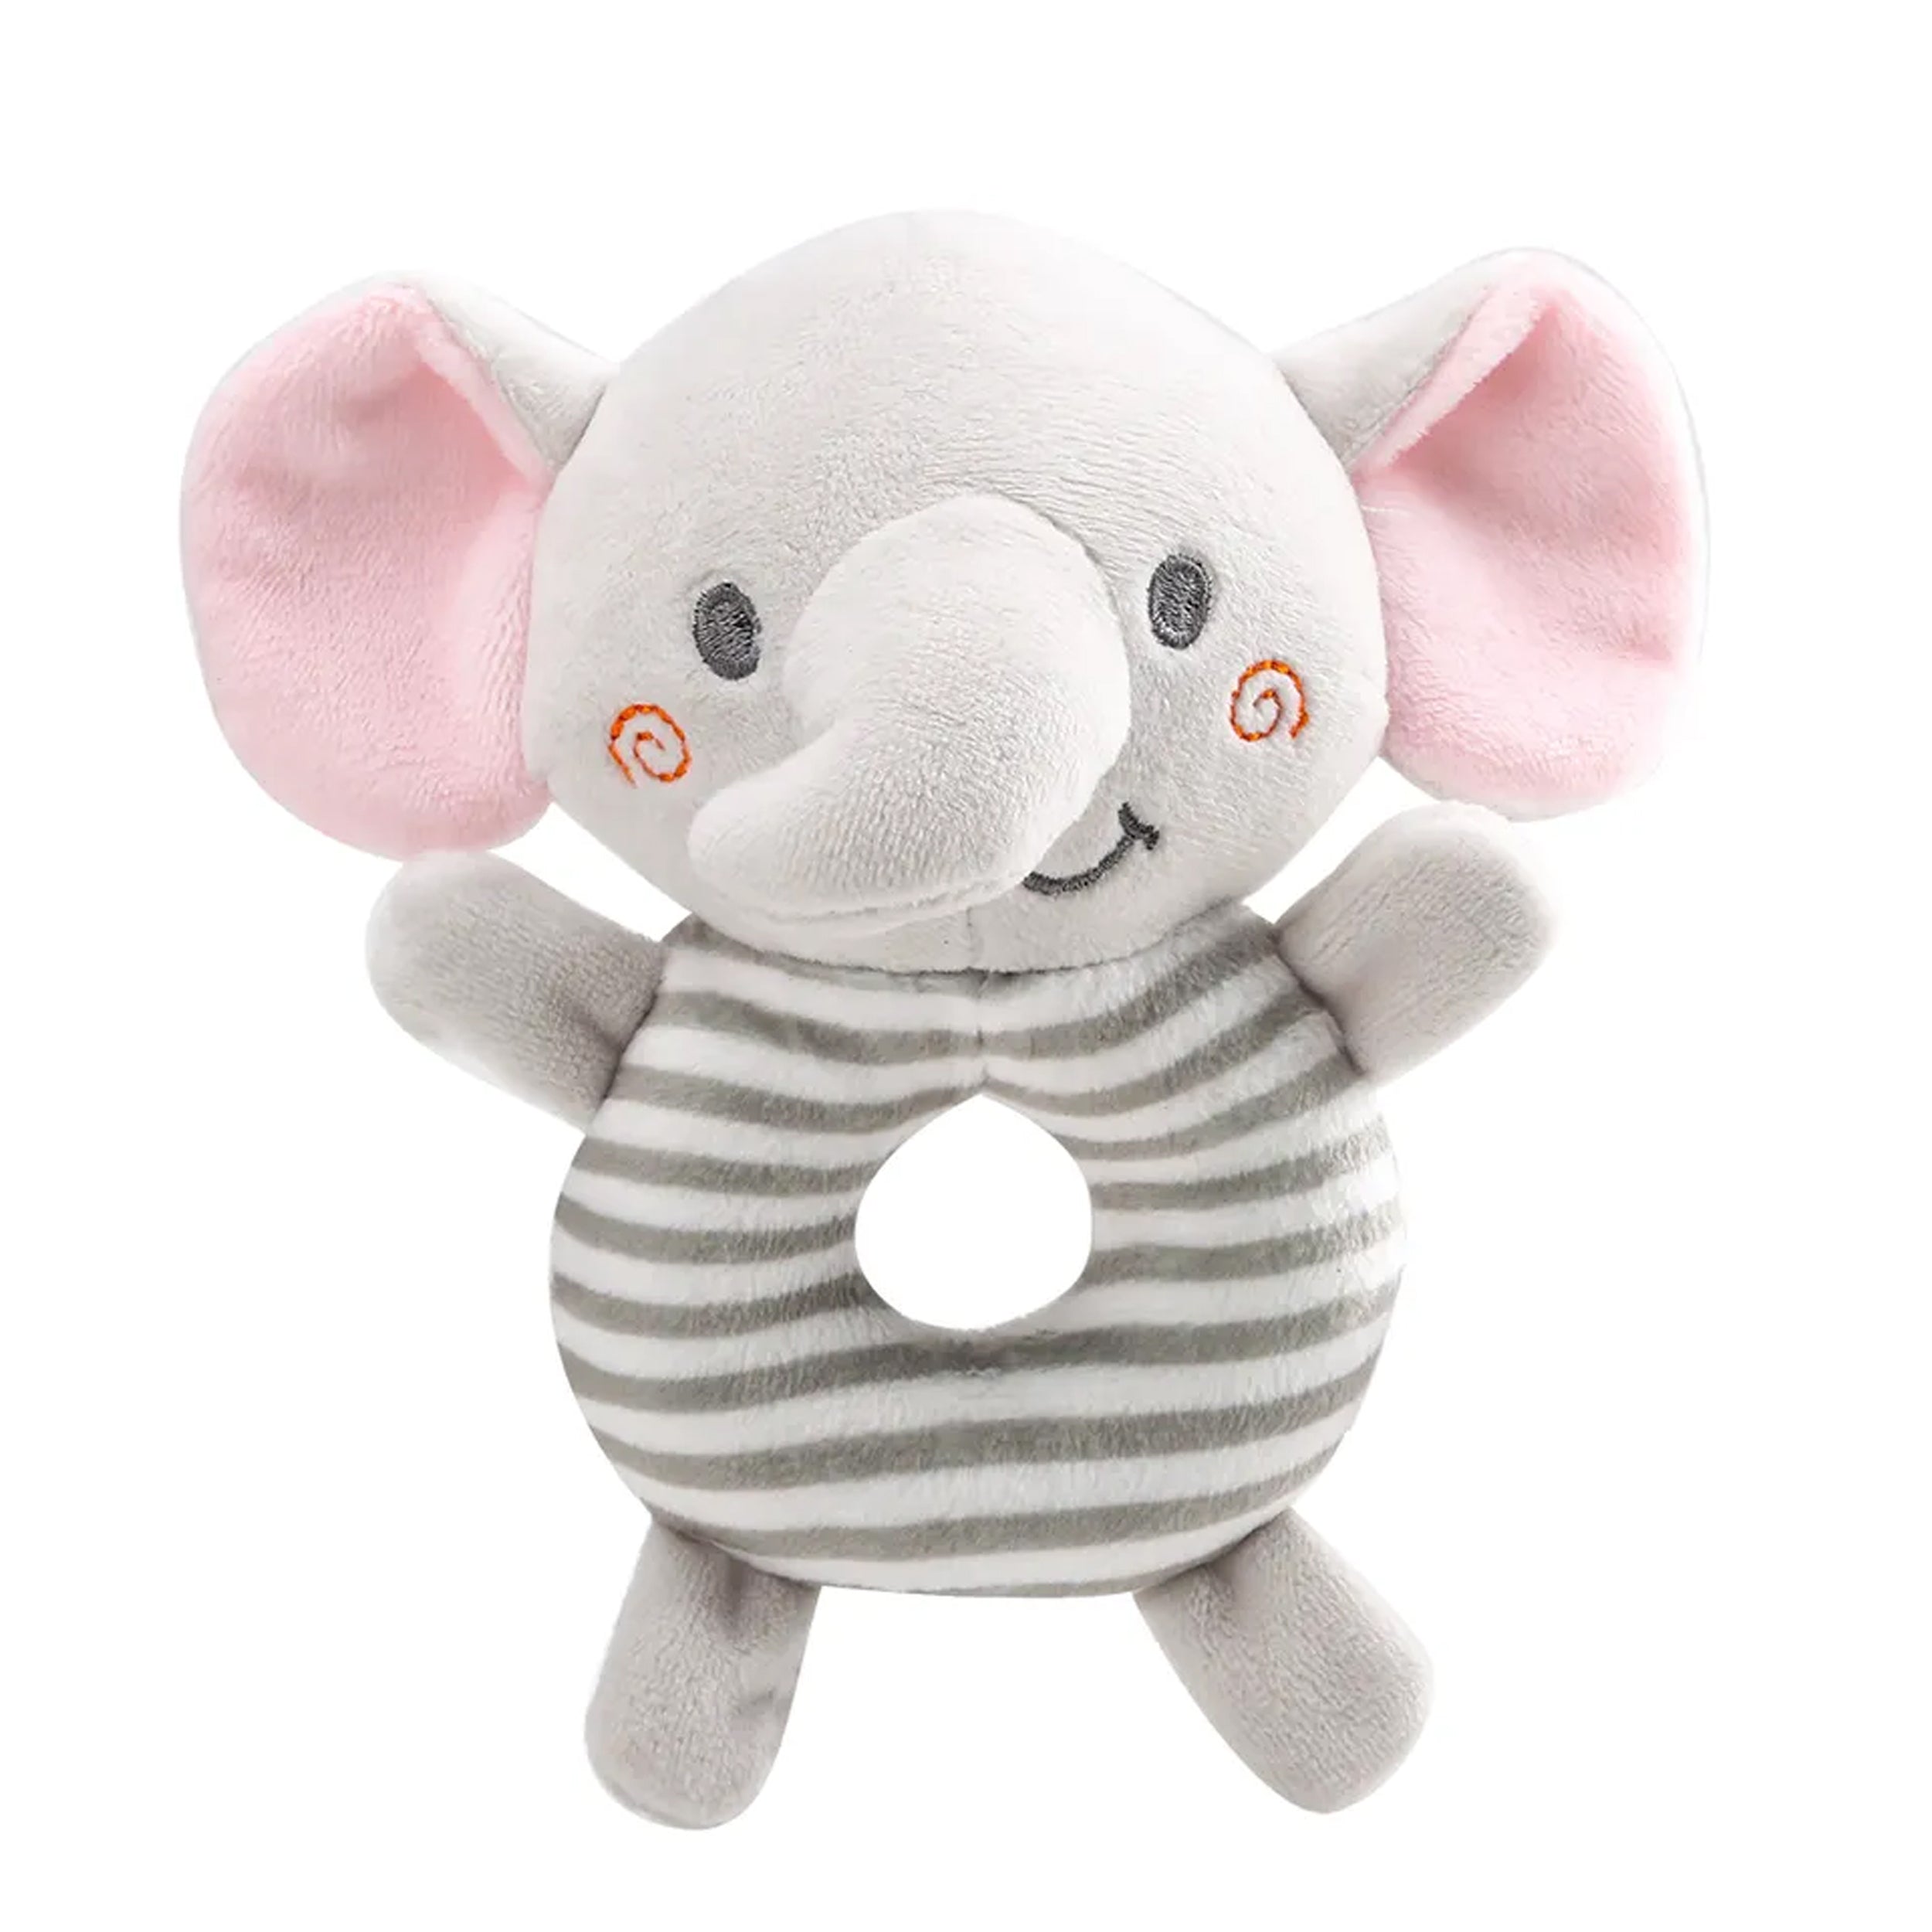 Baby Animal Cartoon Plush Rattle Toys | Soft Hand Bell | 4 Cute Designs Available